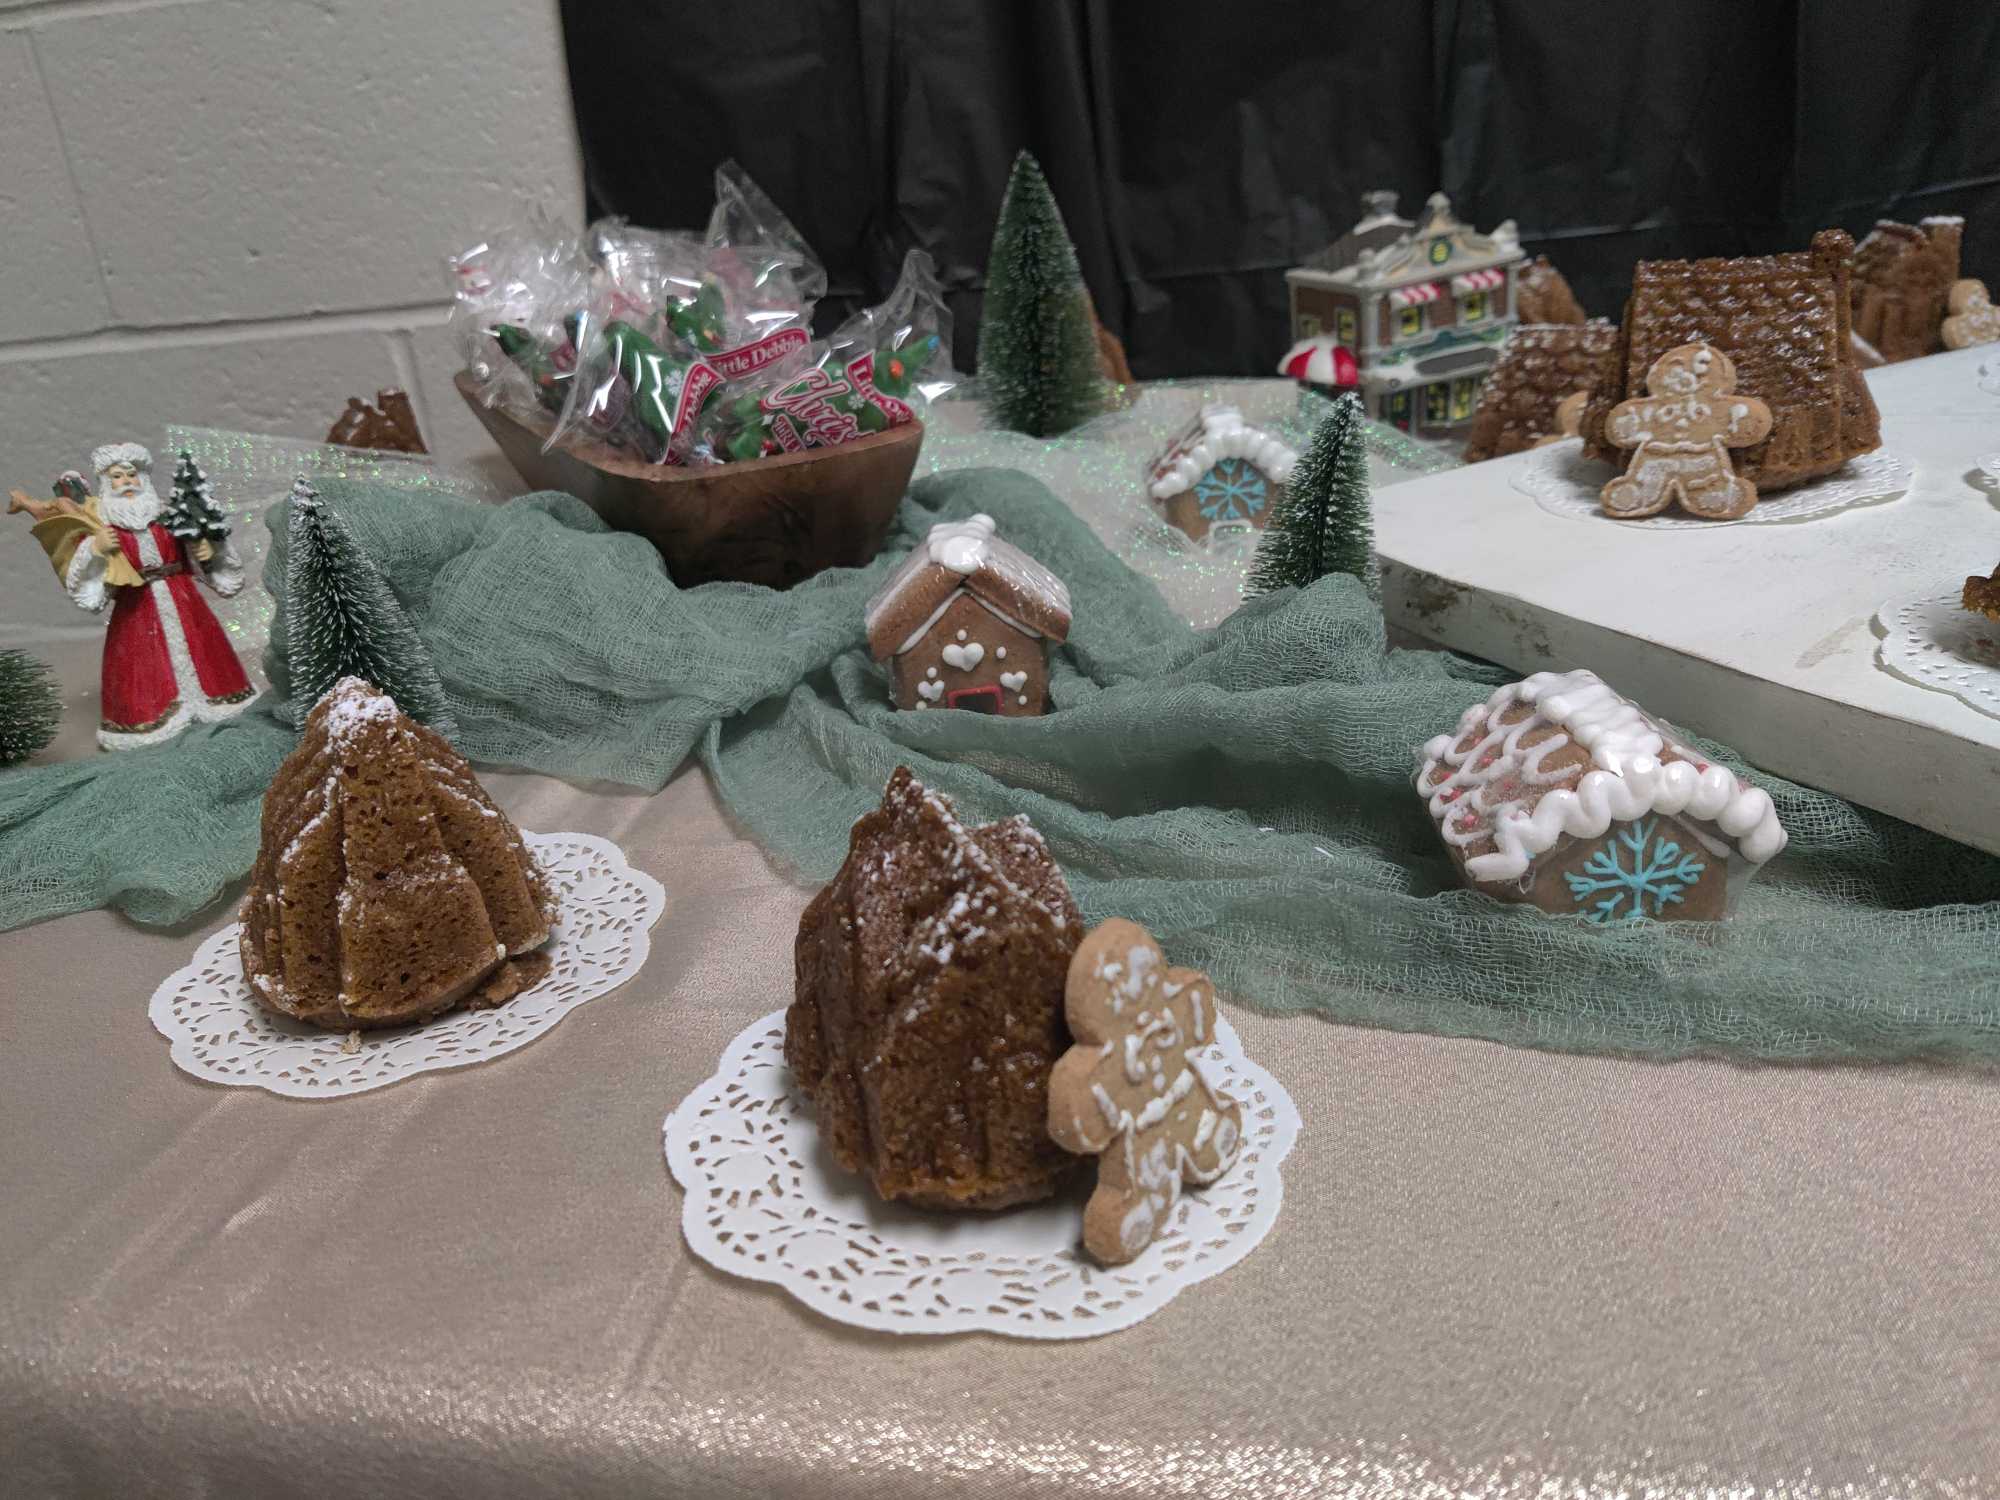 How to Make a Snowy Gingerbread Cake Village